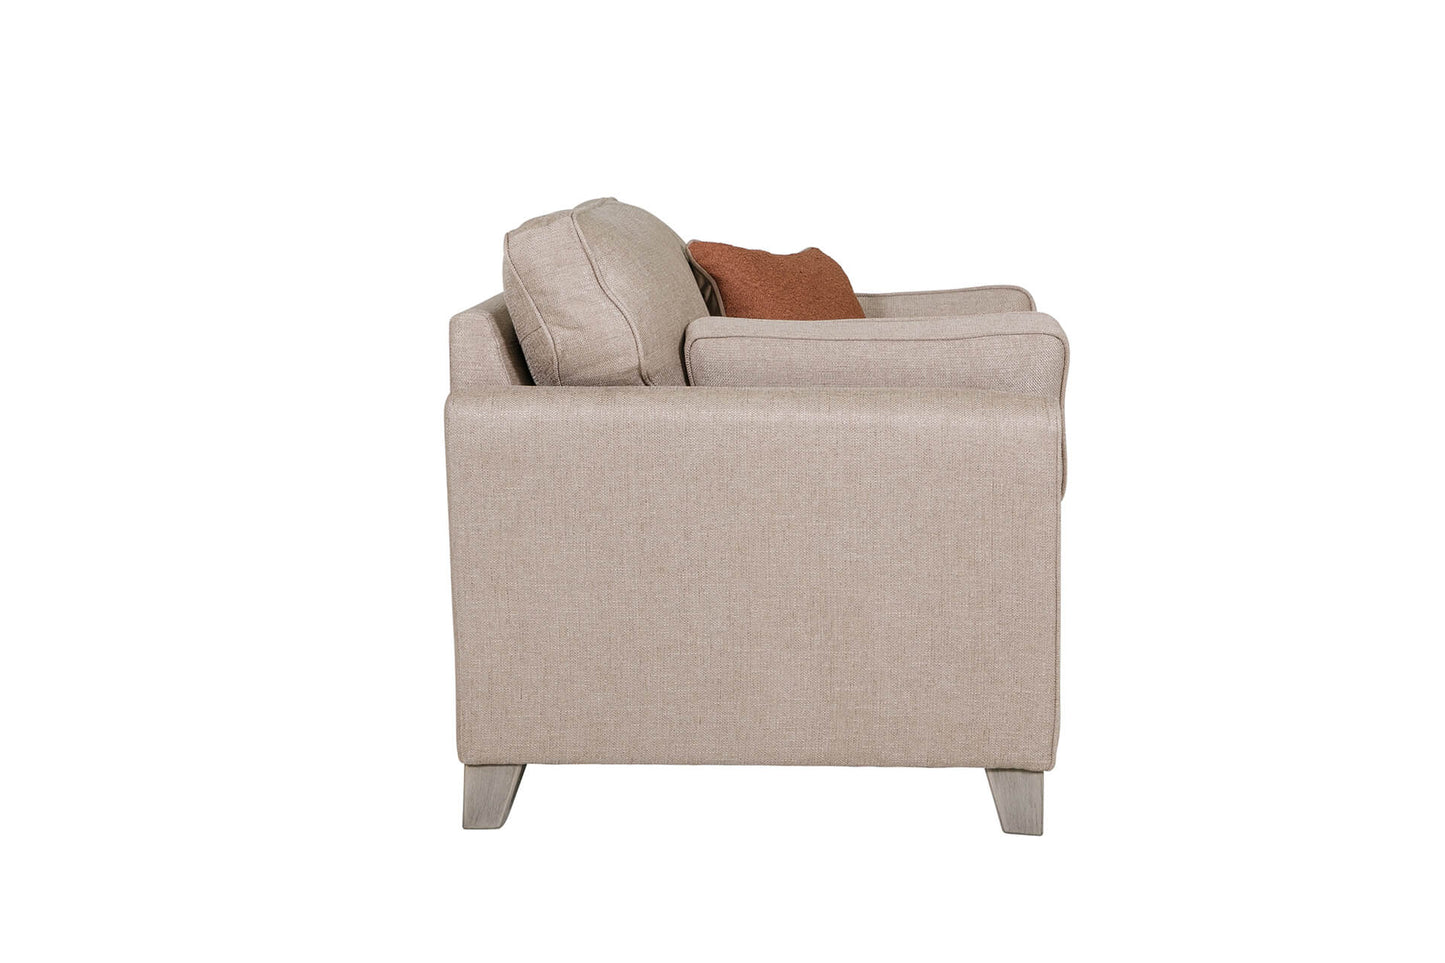 Cantrell 1 Seater Sofa - Biscuit